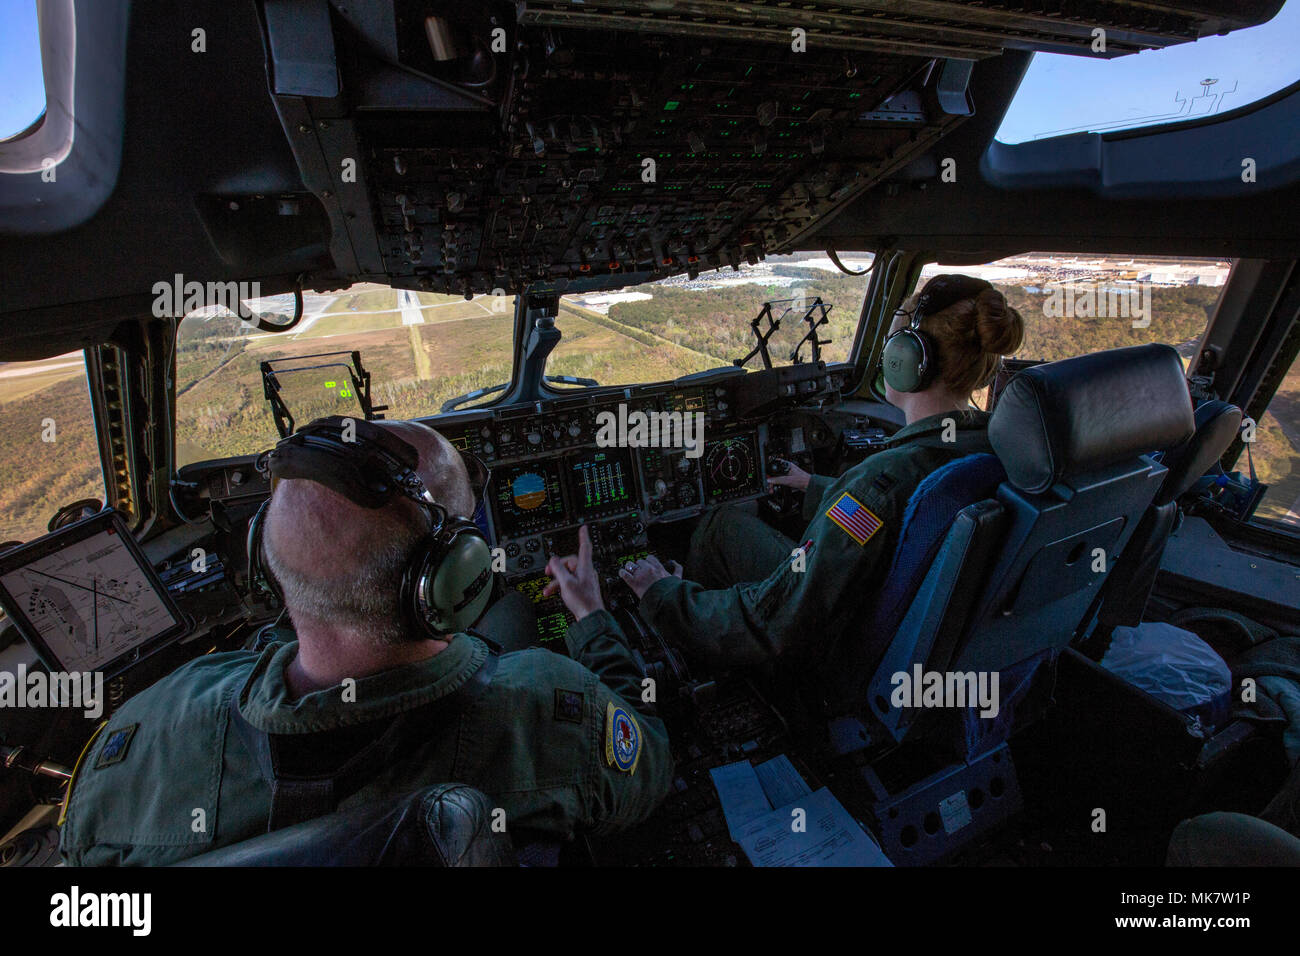 U.S. Air Force Lt. Col. Samuel F. Irvin, left, Commander, 732nd Airlift Squadron, and Capt. Maggie R. Linn, both C-17 Globemaster III Pilots with the 732nd Airlift Squadron, 514th Air Mobility Wing, make their final approach at Charleston Air Force Base, S.C., Nov. 17, 2017. The 514th‘s 732nd Airlift Squadron C-17 crew are combining training and a real world Denton Program humanitarian mission bringing 76,410 pounds of food to the Republic of Haiti. The 514th is located at Joint Base McGuire-Dix-Lakehurst, N.J. (U.S. Air Force photo by Master Sgt. Mark C. Olsen) Stock Photo